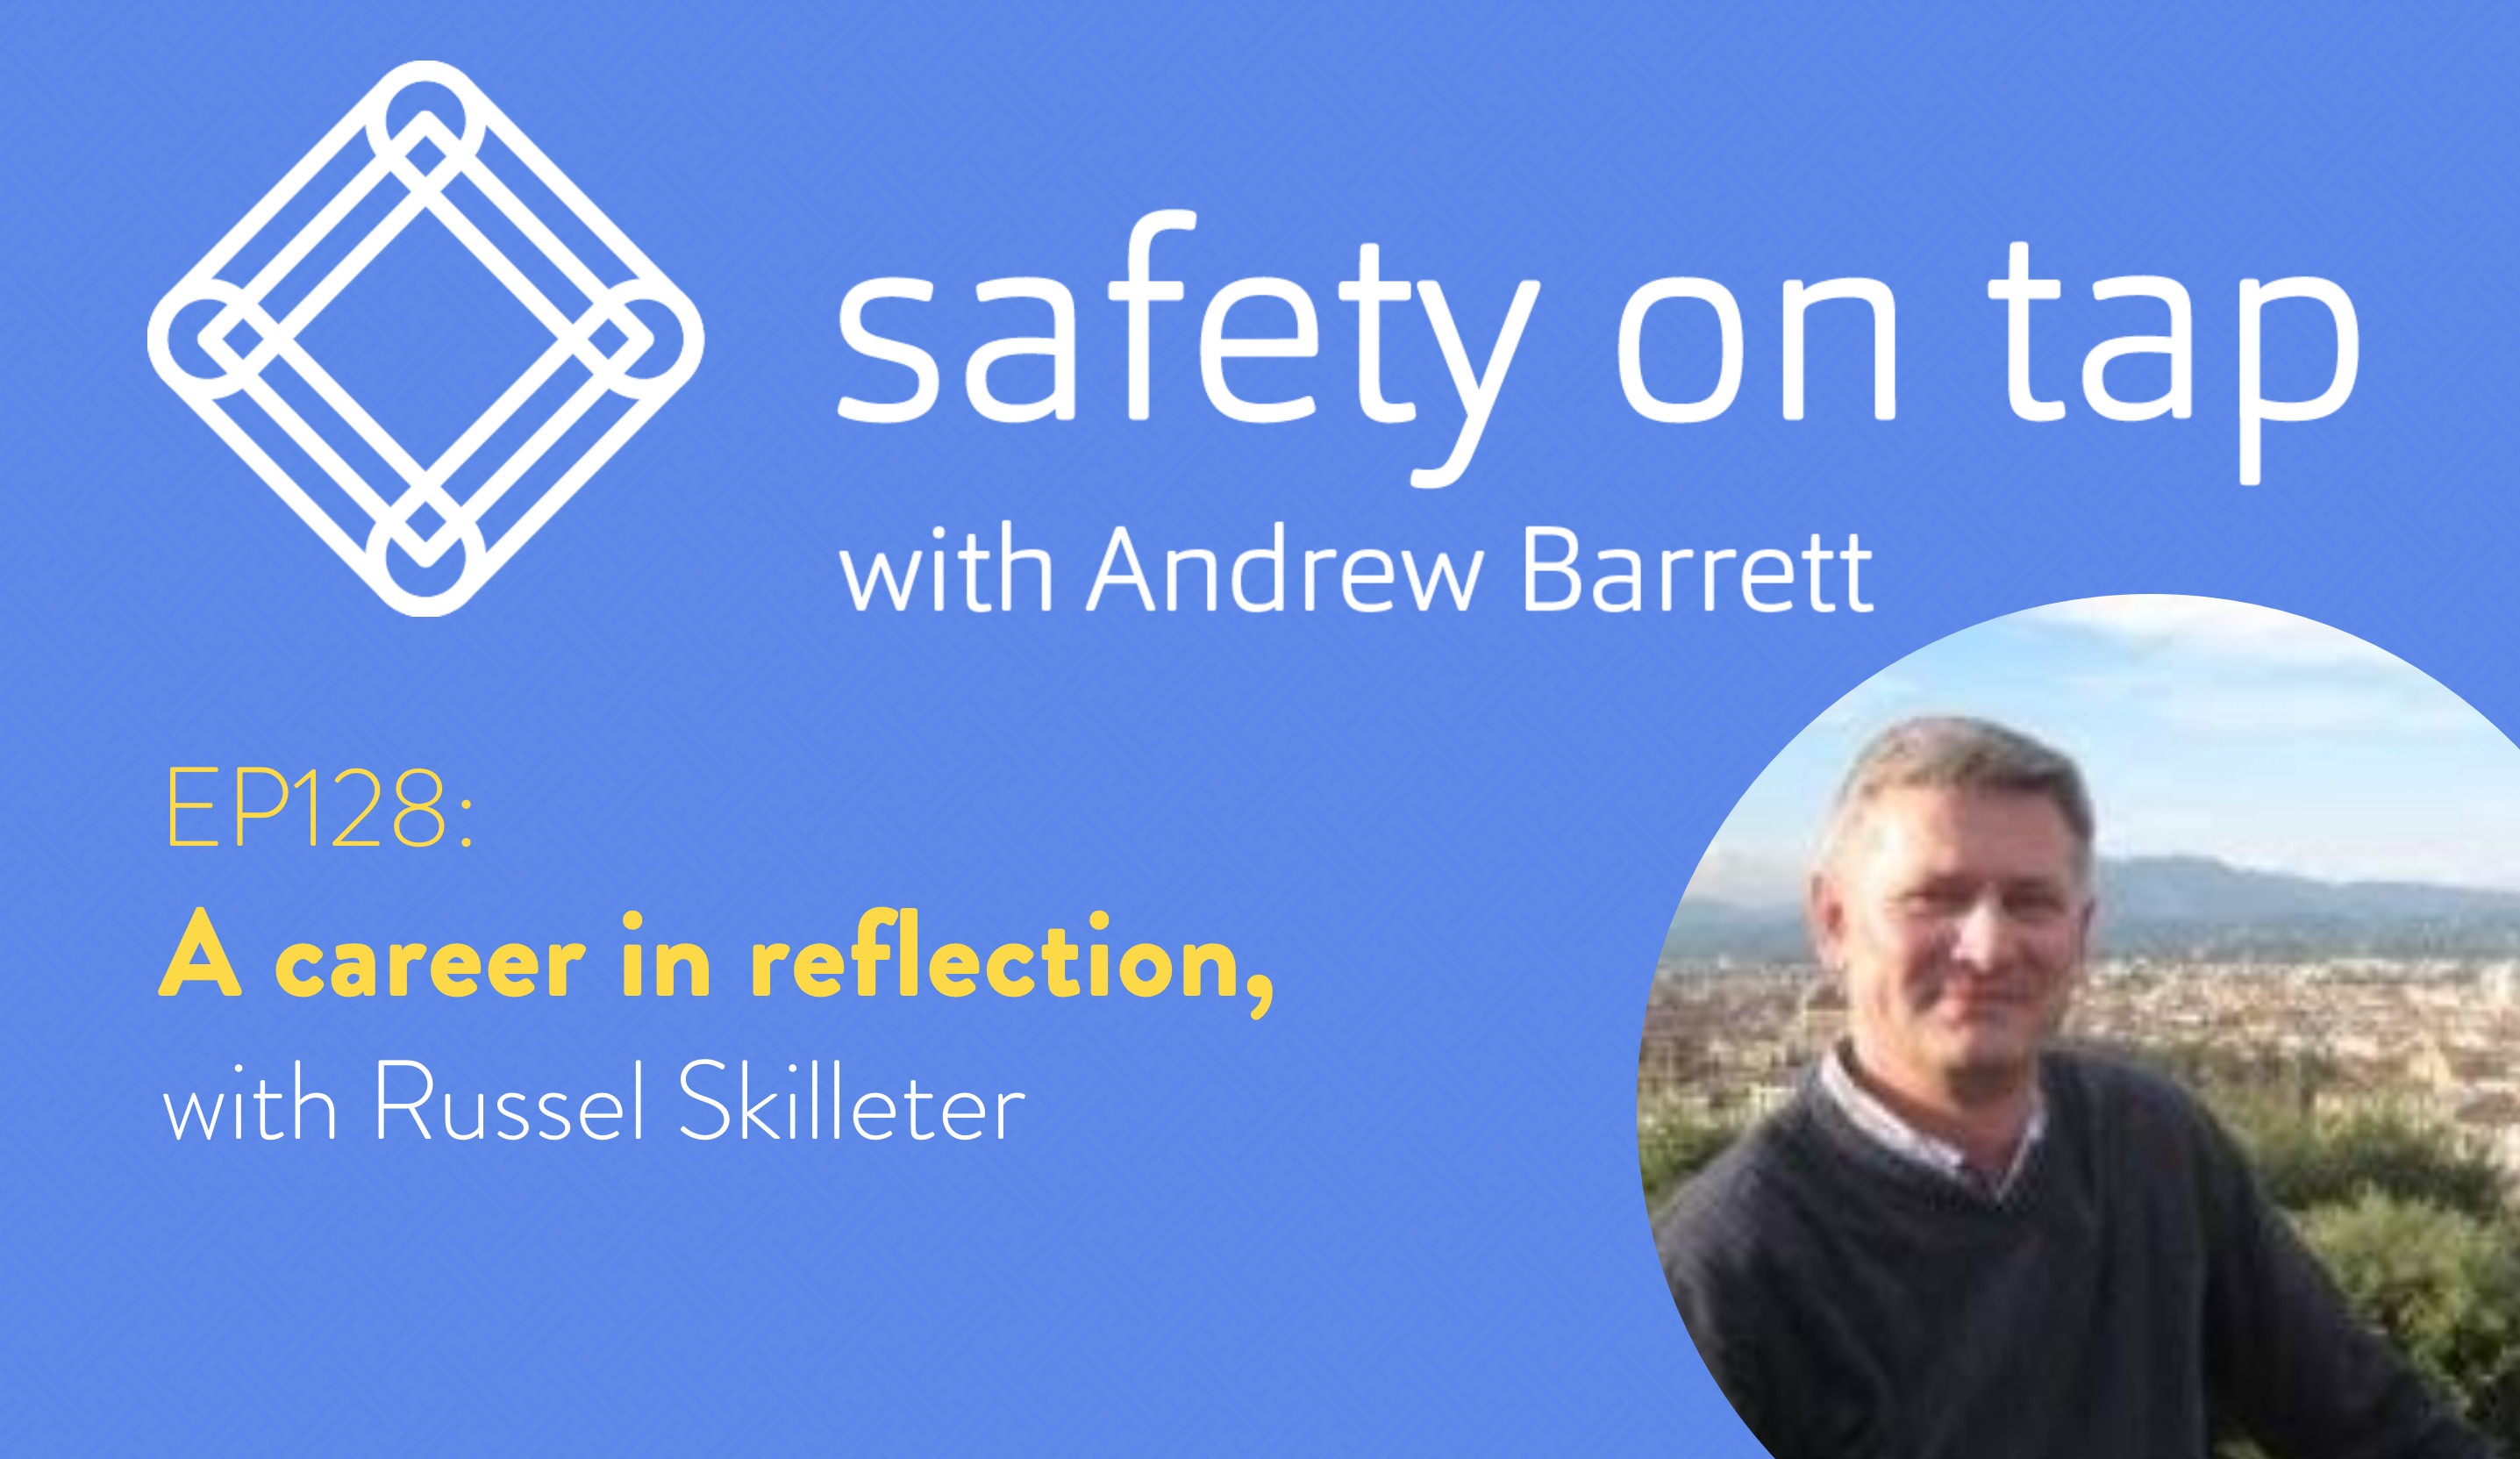 Ep128: A career in reflection, with Russel Skilleter